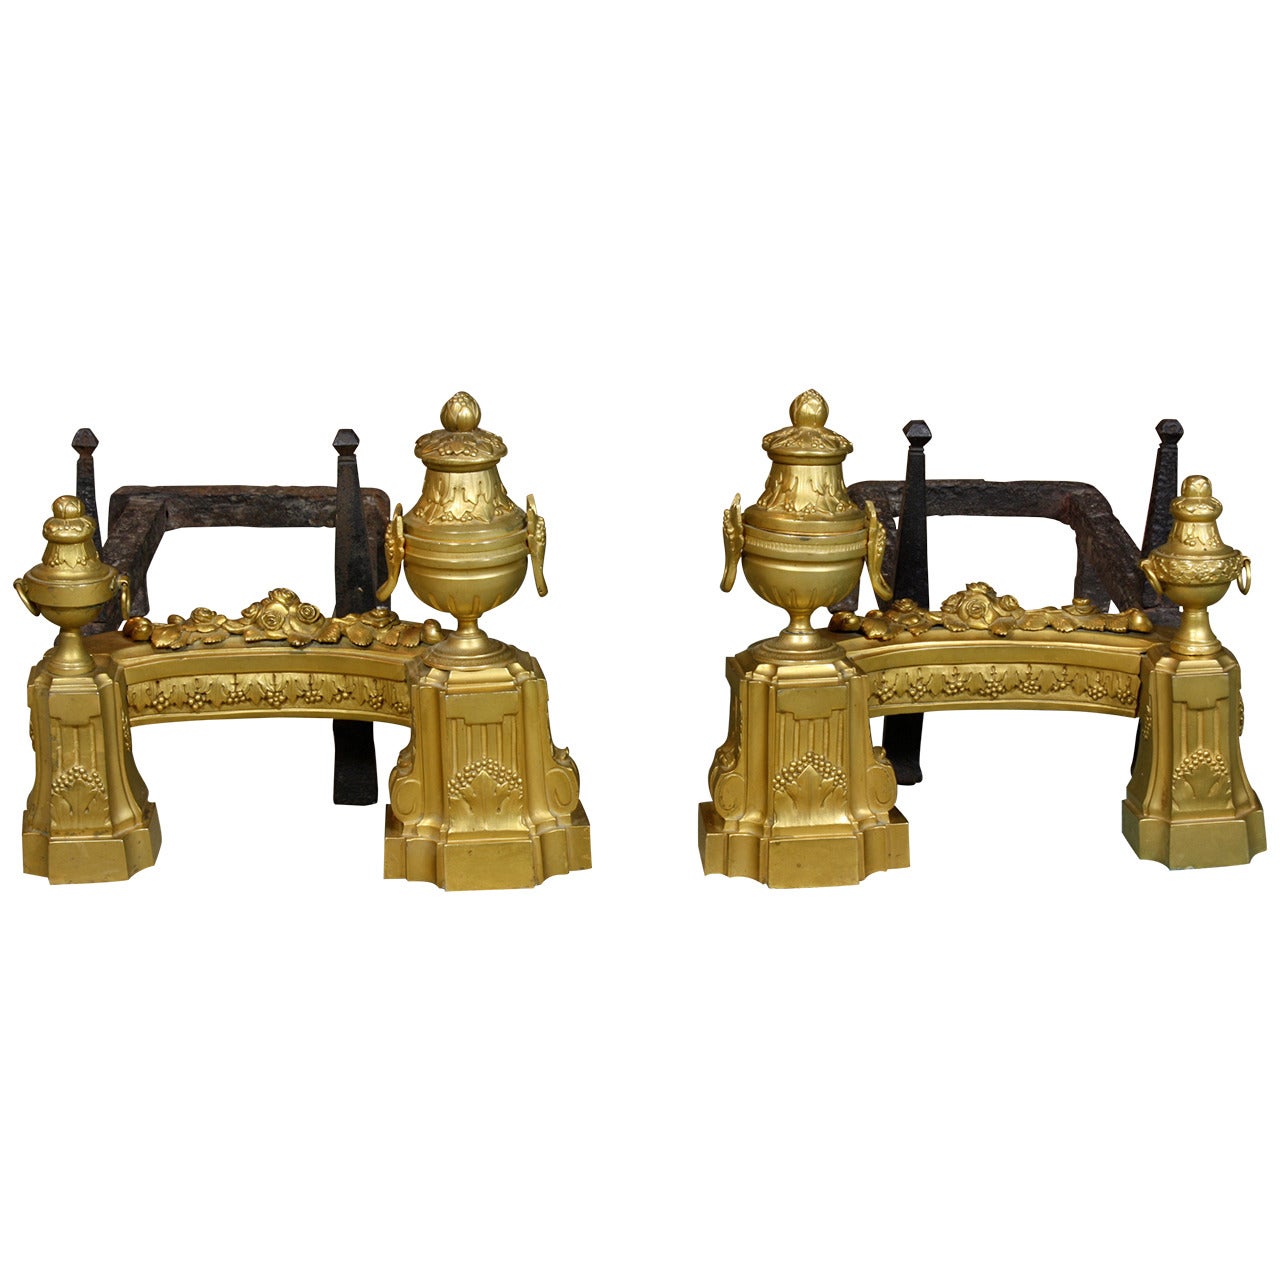 Pair of French Gilt-Bronze Neoclassical Andirons For Sale